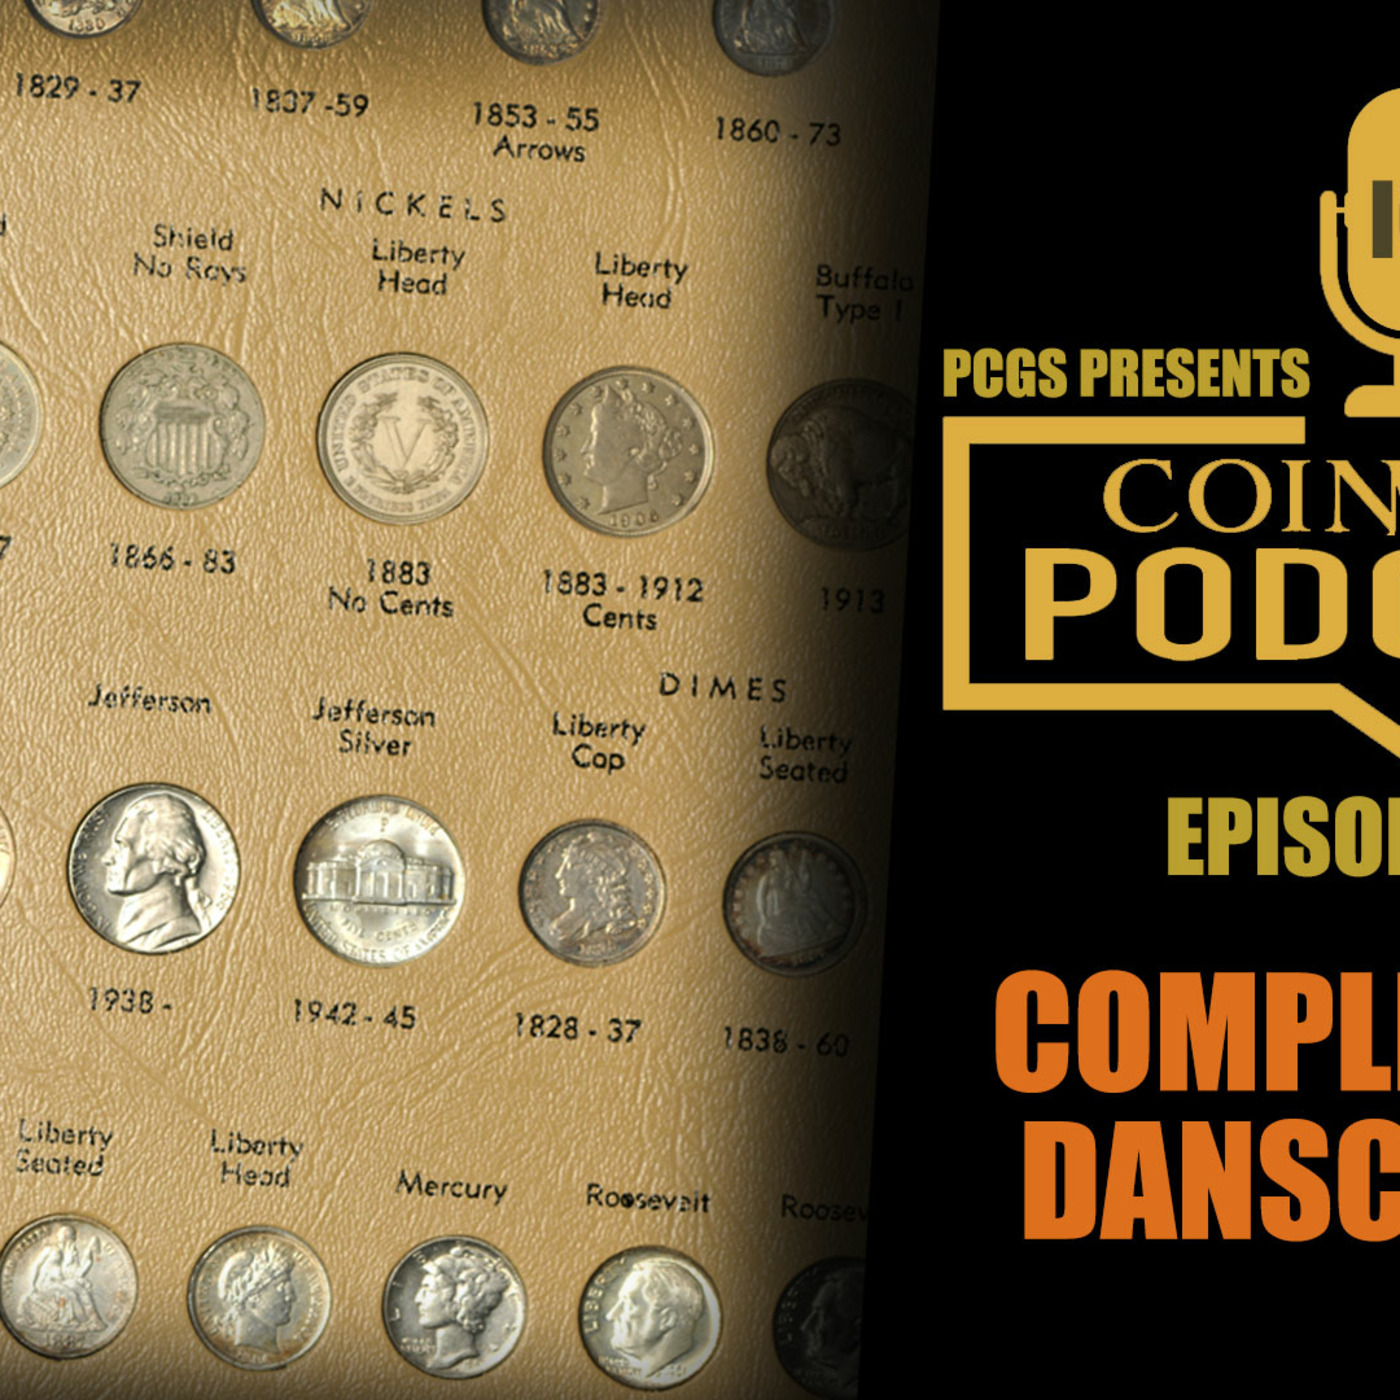 Episode 152: CoinWeek Podcast #152: Completing a DANSCO 7070